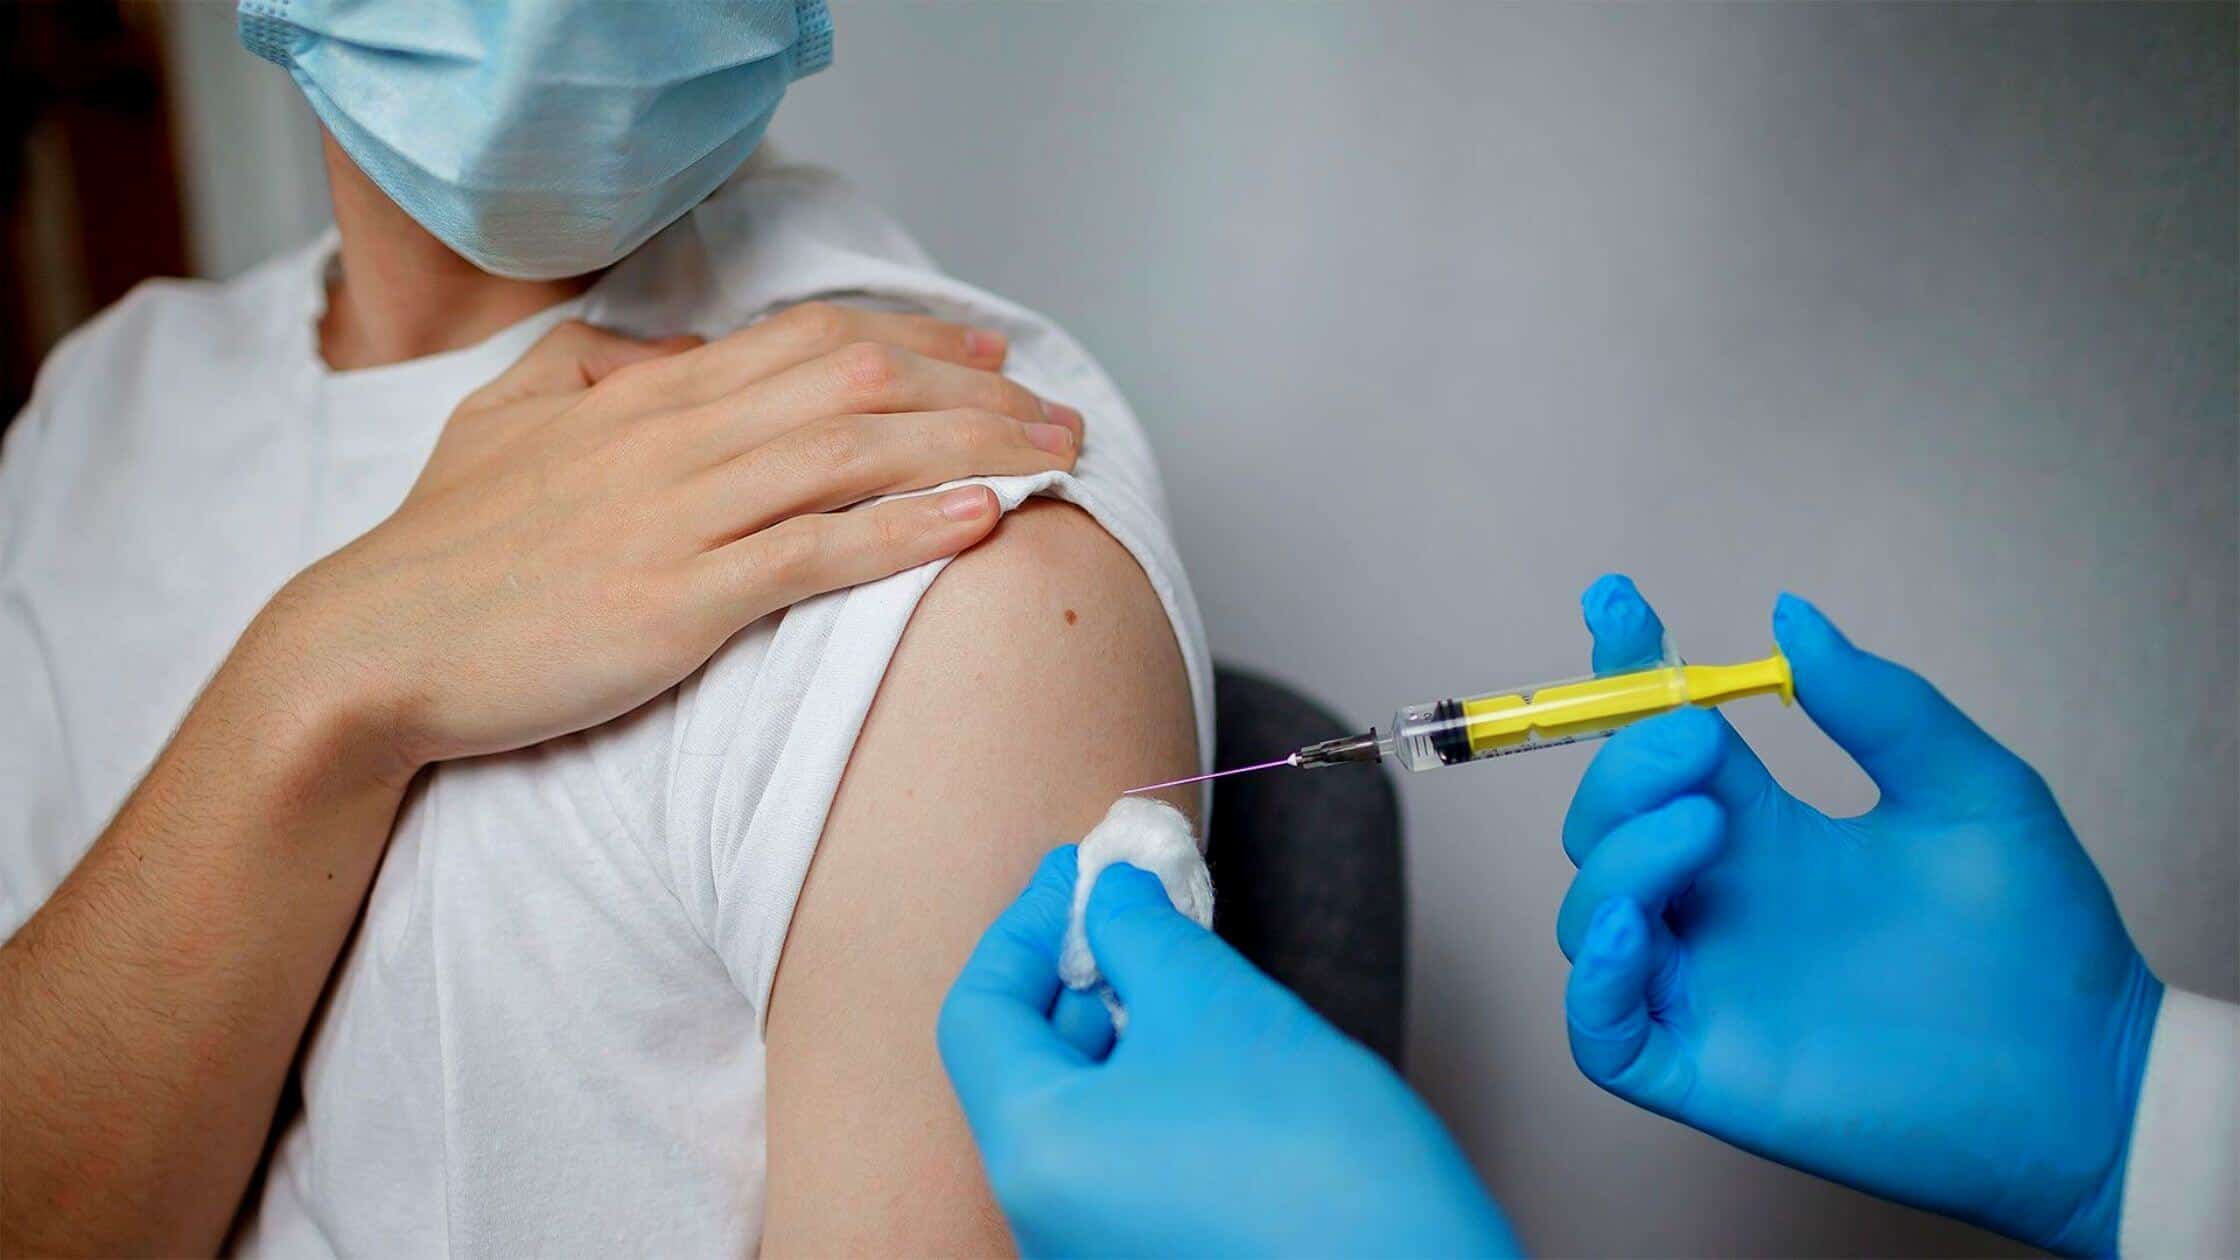 The Cost Of The Covid-19 Vaccination Is Up To $130 Per Dosage Pfizer Says